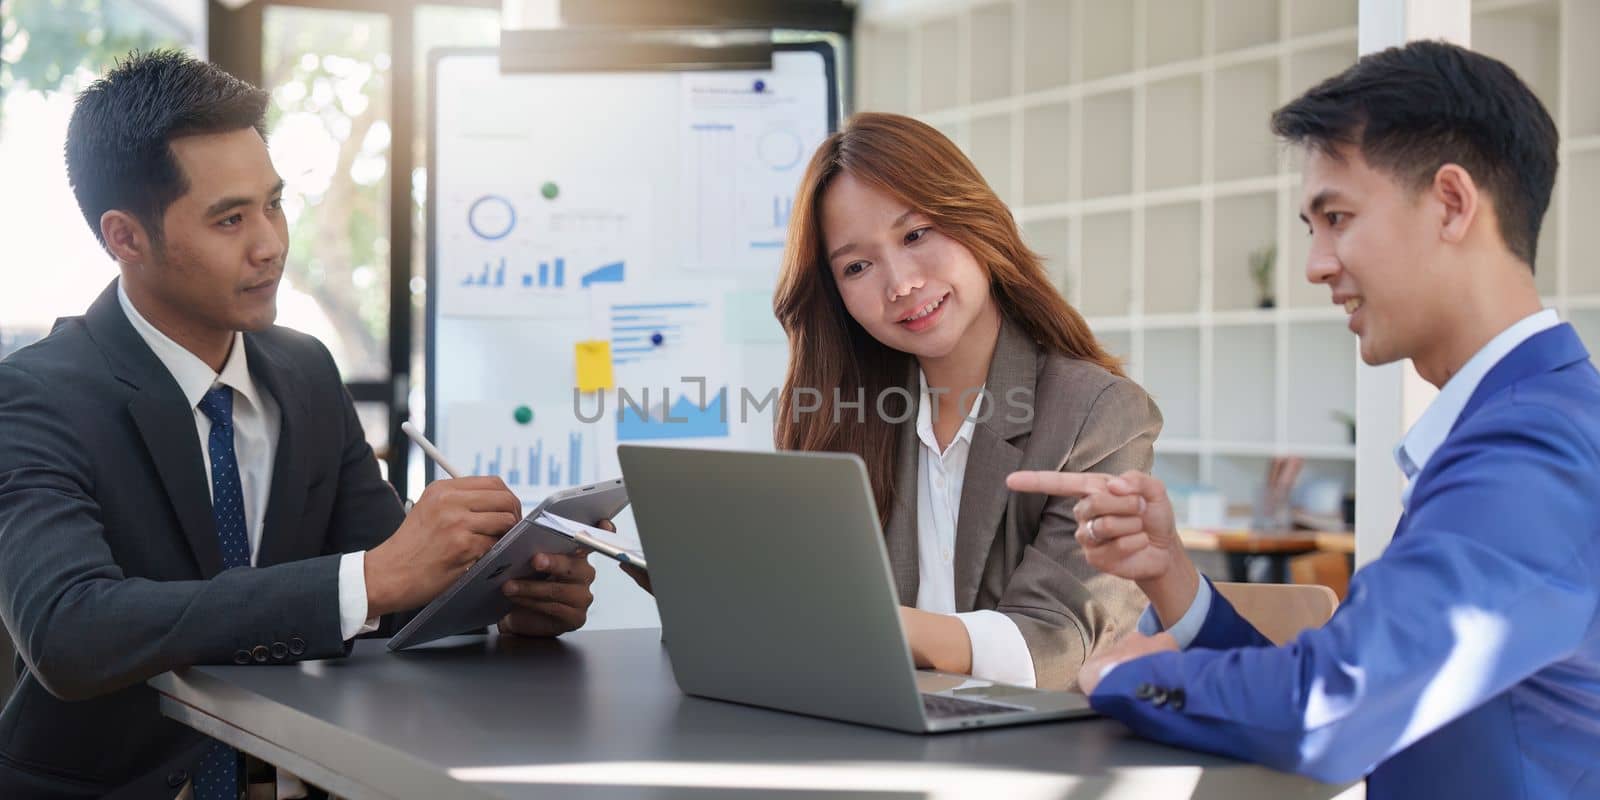 Financial analyst analyzes business people investment consultant analyzing company financial report working with documents graphs. Stock Market Tax Fund Finance concept.